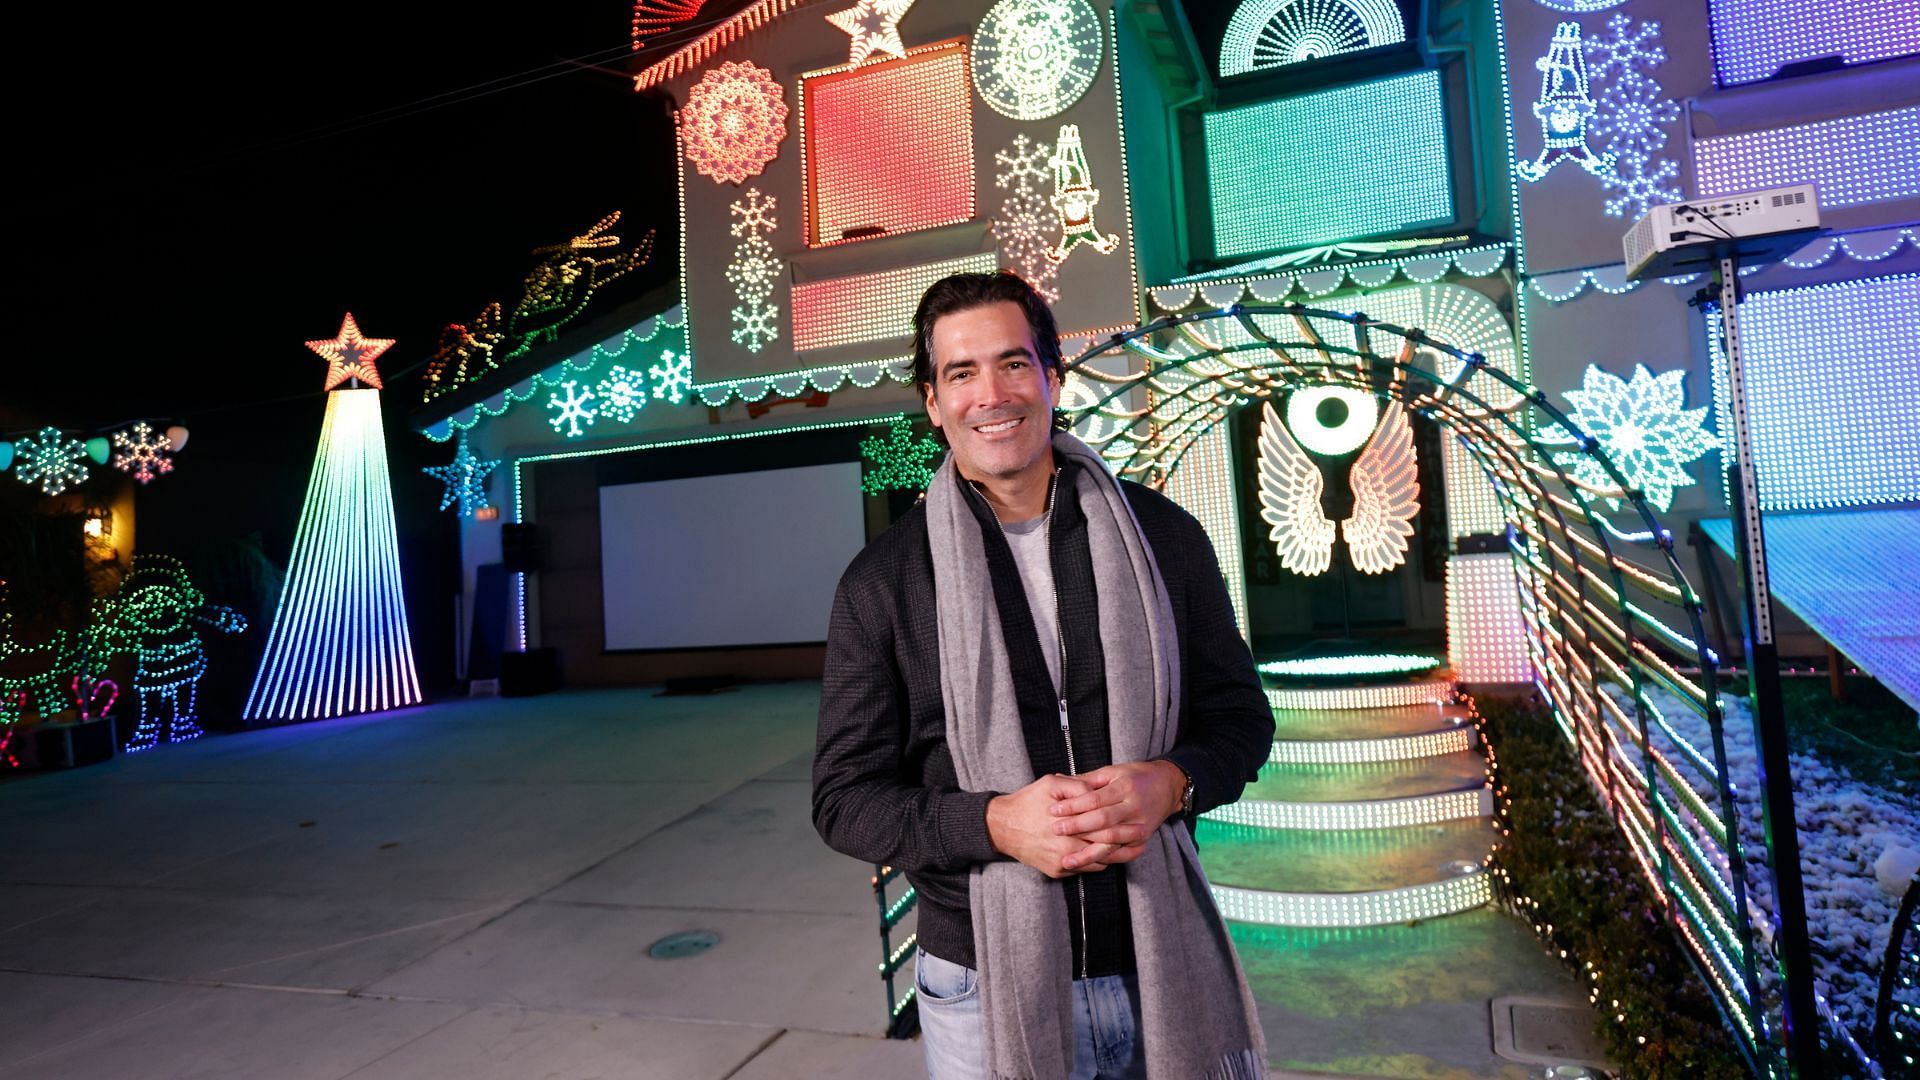 Carter Oosterhouse to host The Great Christmas Light Fight